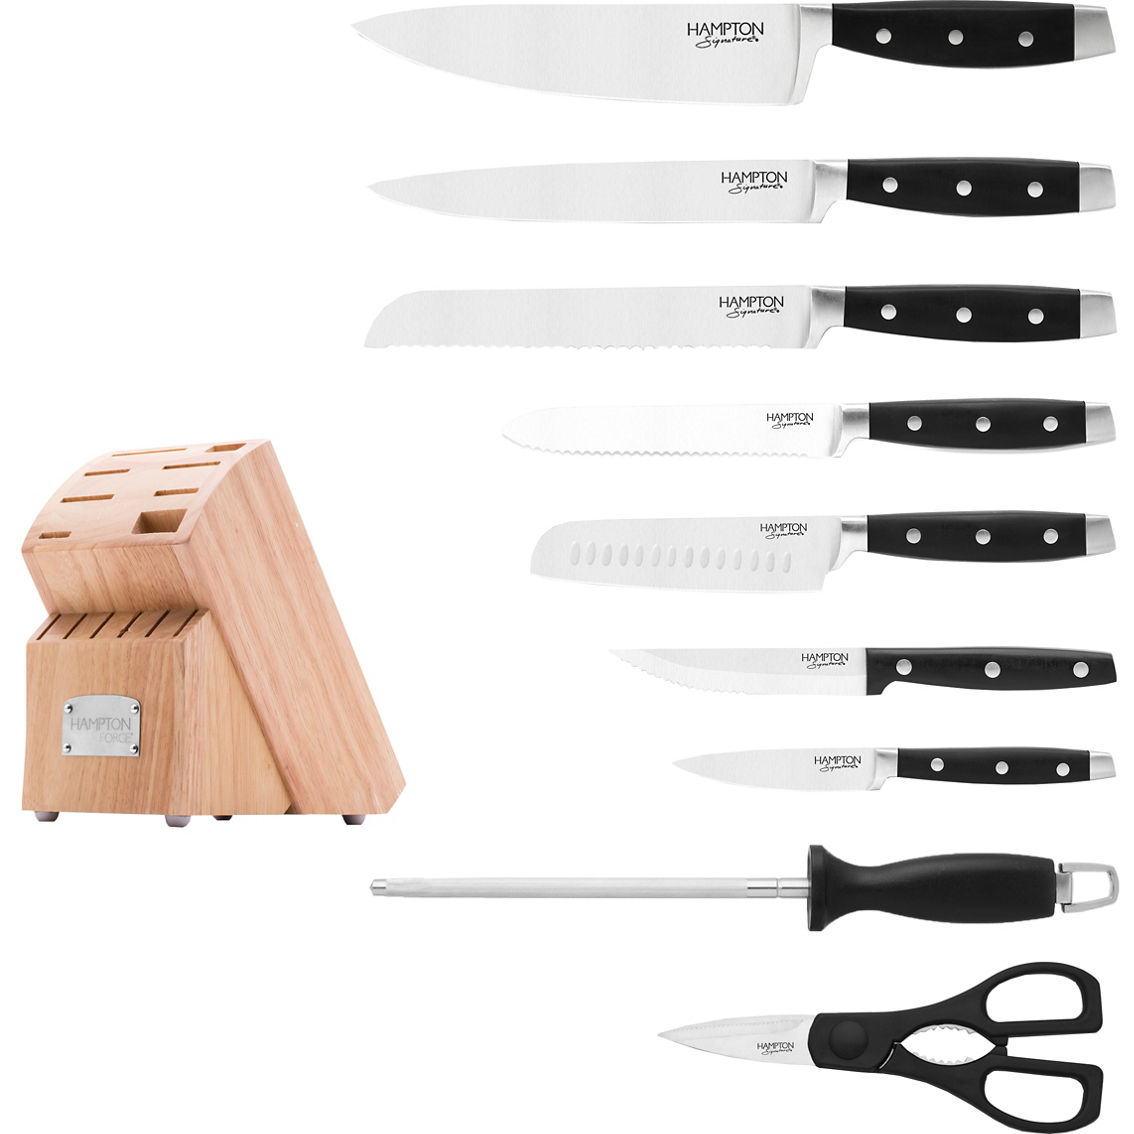 Hampton Forge Continental 15 pc. Cutlery Set with Block - Image 2 of 3